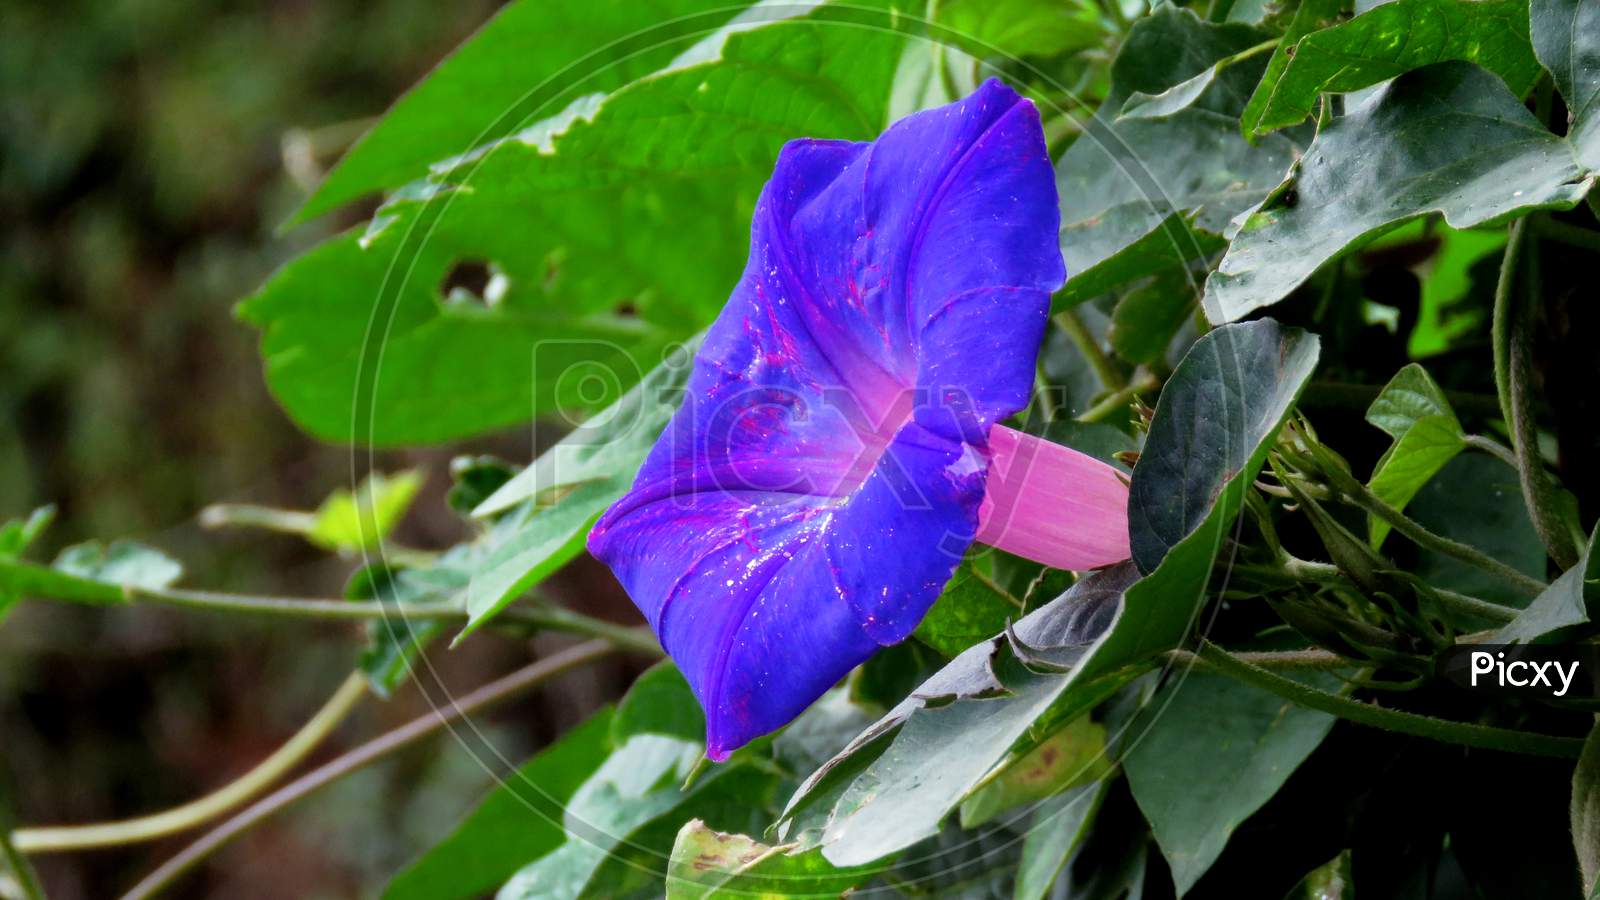 Morning glory flower in the garden,blue and purple flower.surrounded by green leaves.